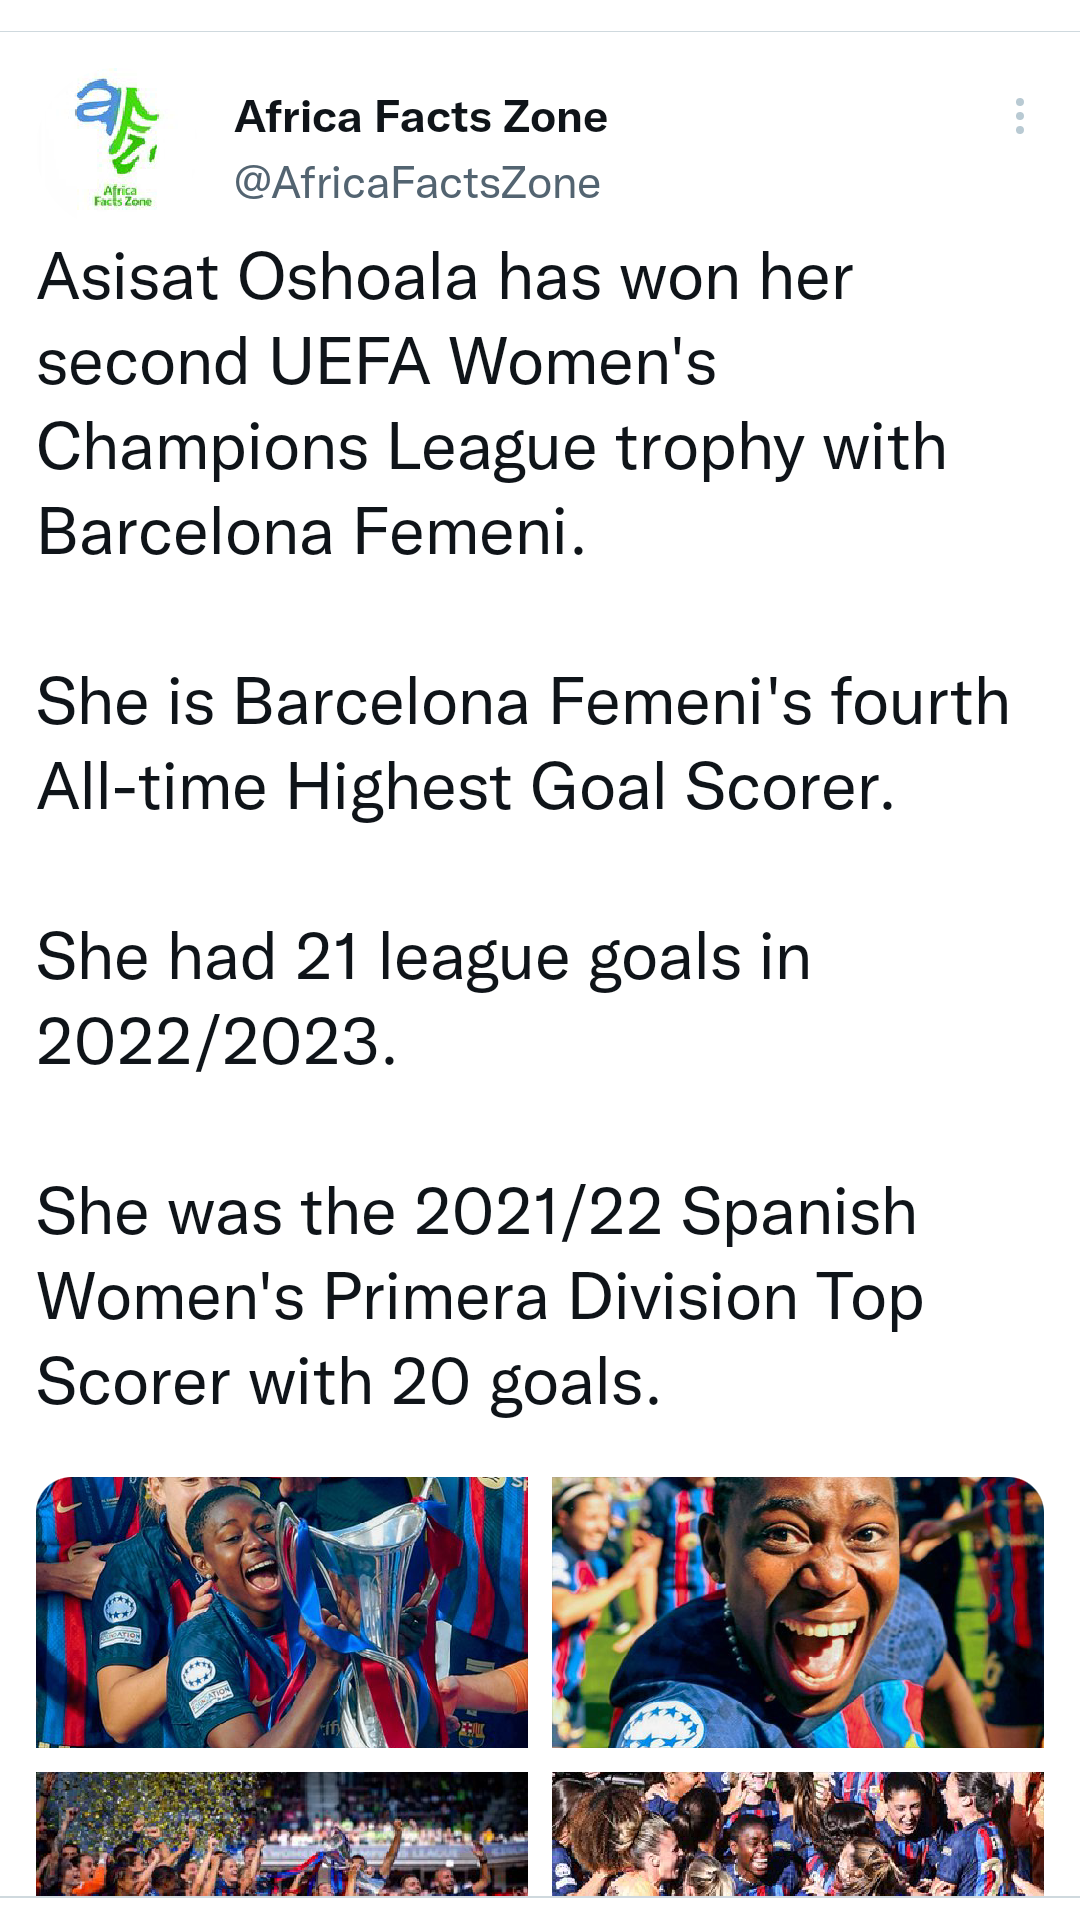 Asisat Oshoala wins second Women?s Champions League title with Barcelona to become Africa